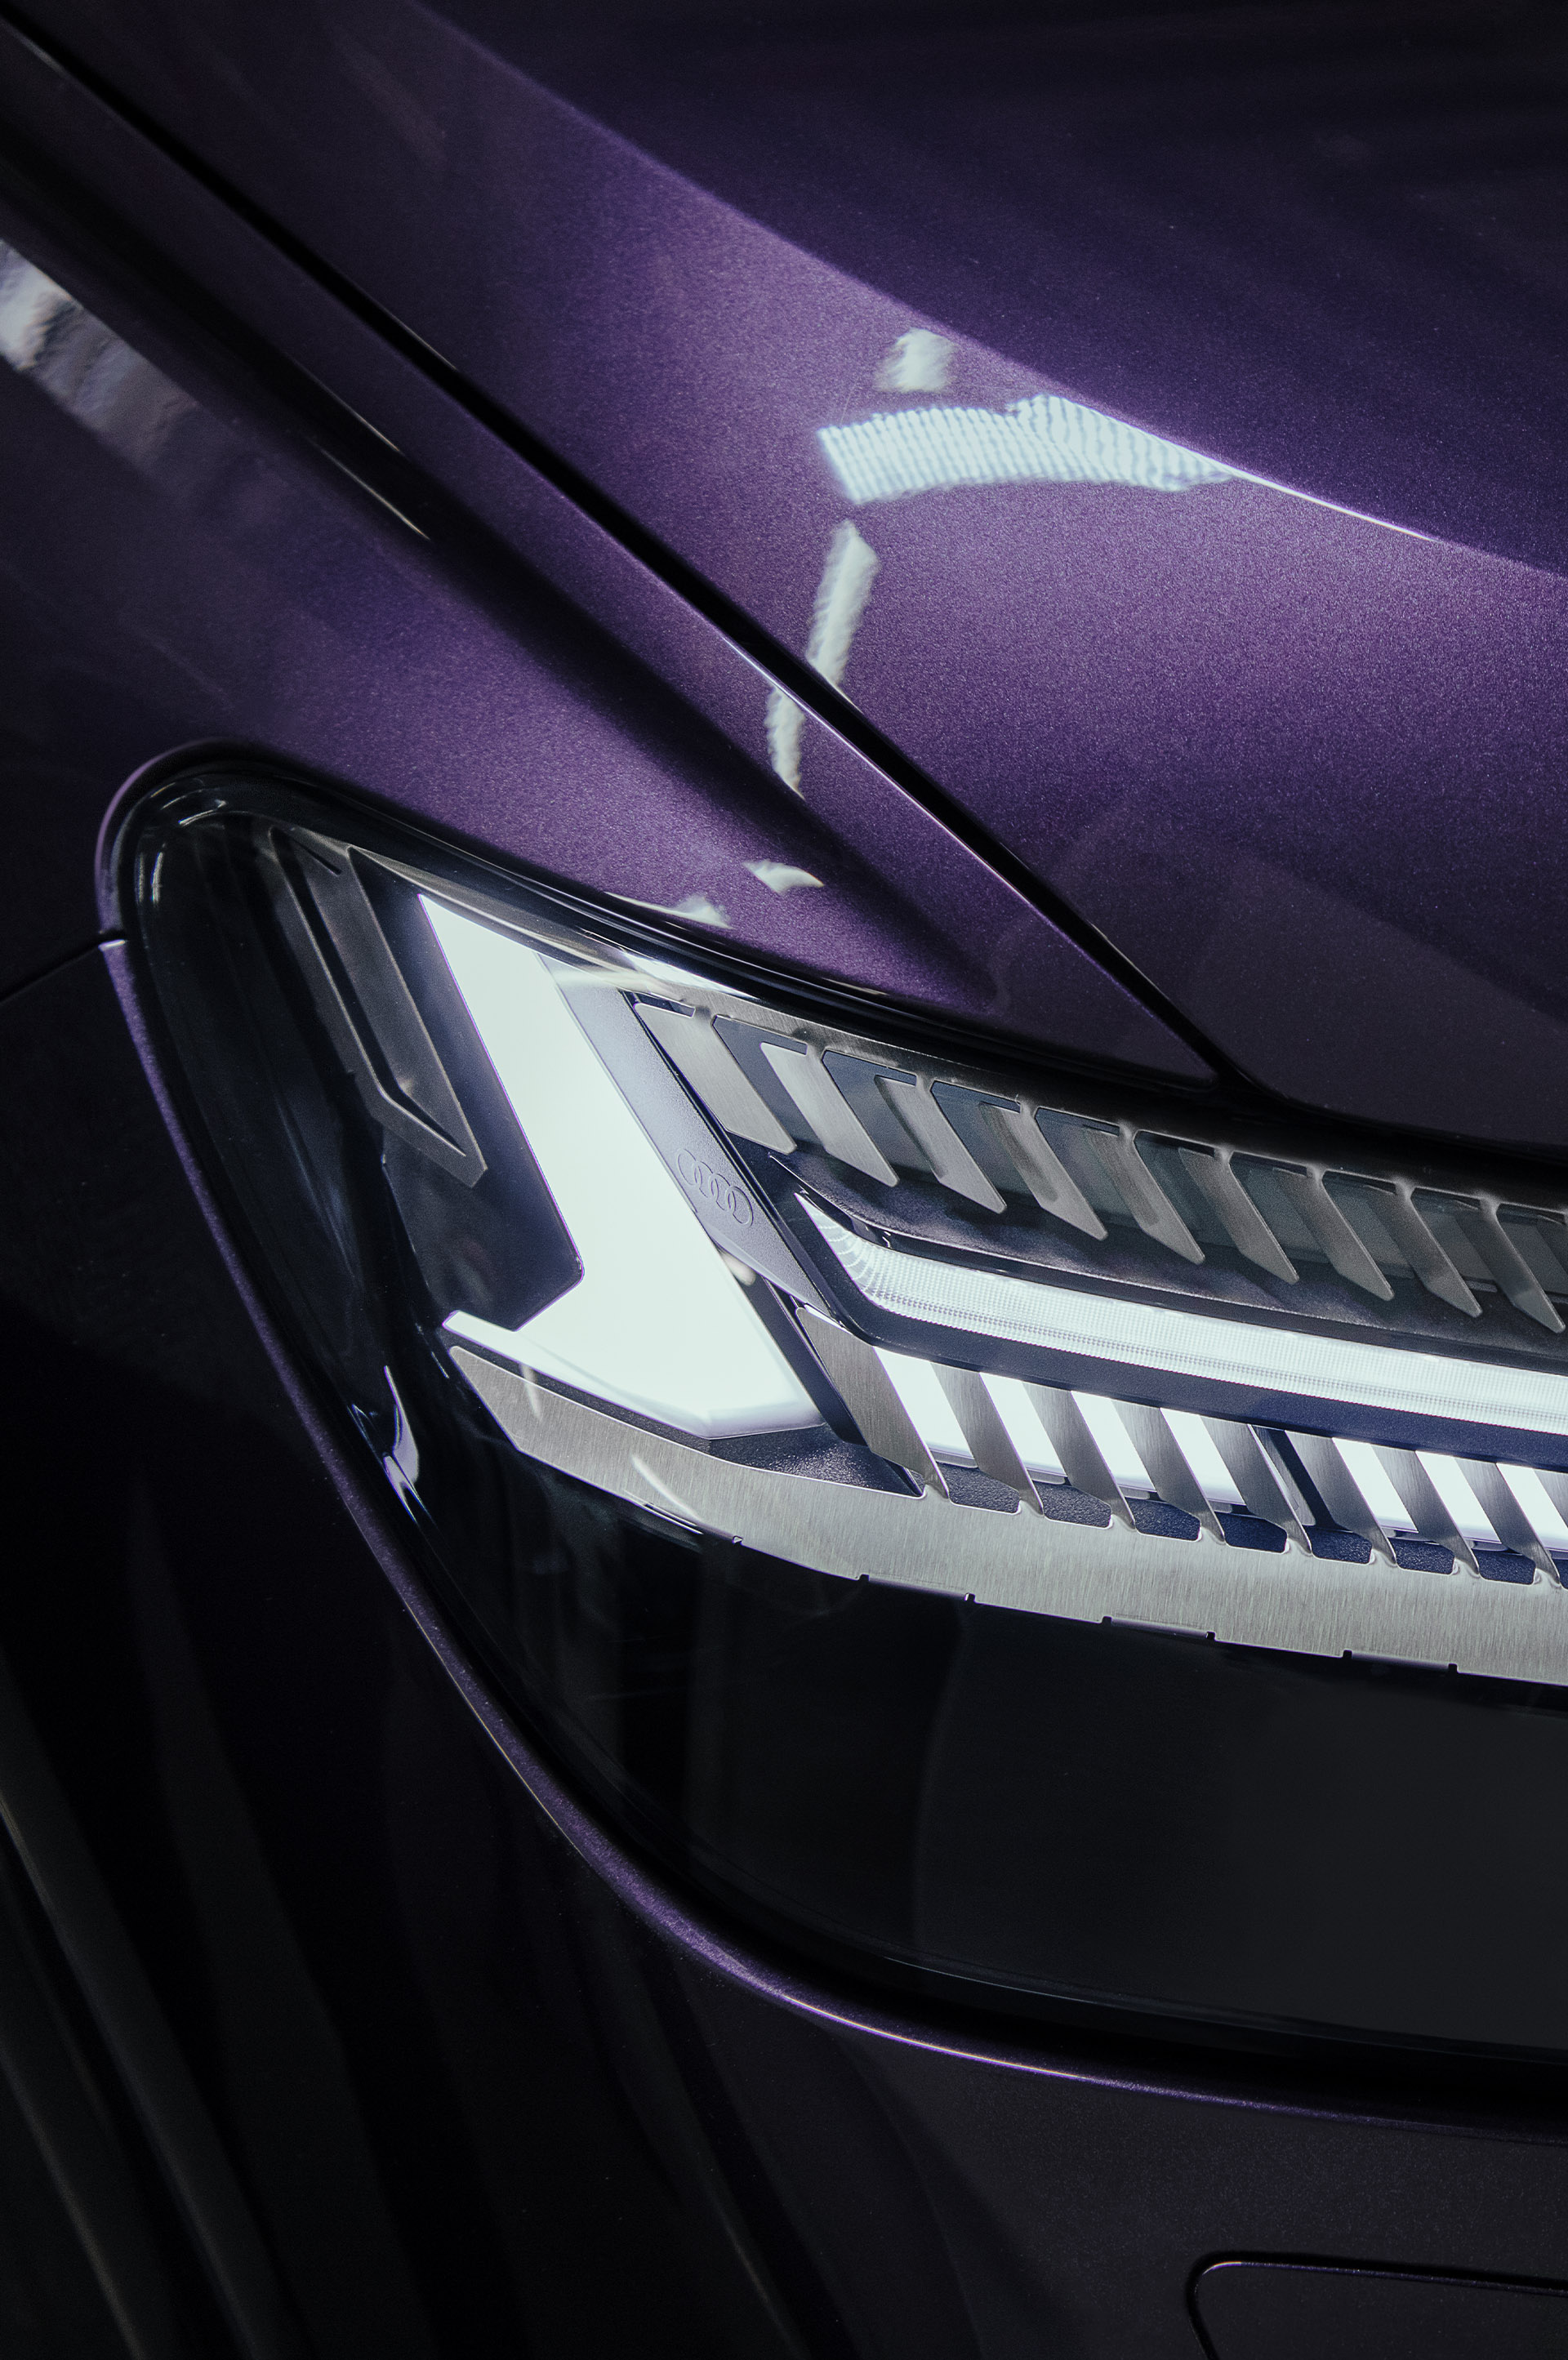 Close-up of the headlights on the new Audi Q4 e-tron.